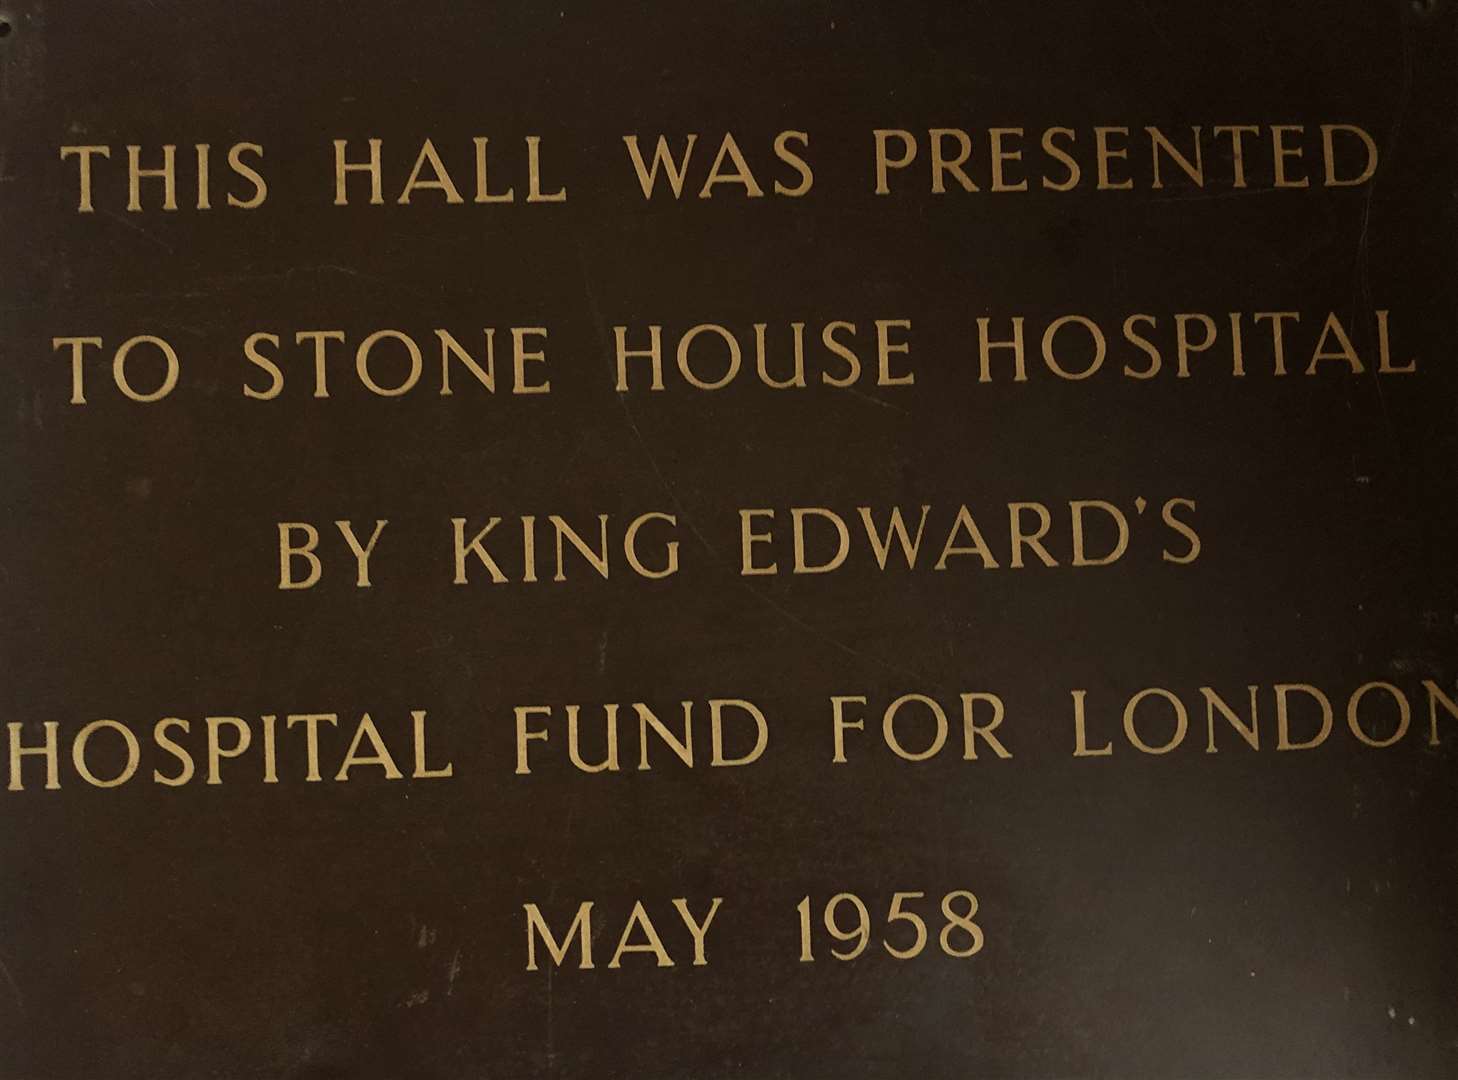 A plaque presented to Stone House Hospital from King Edward's fund in 1958